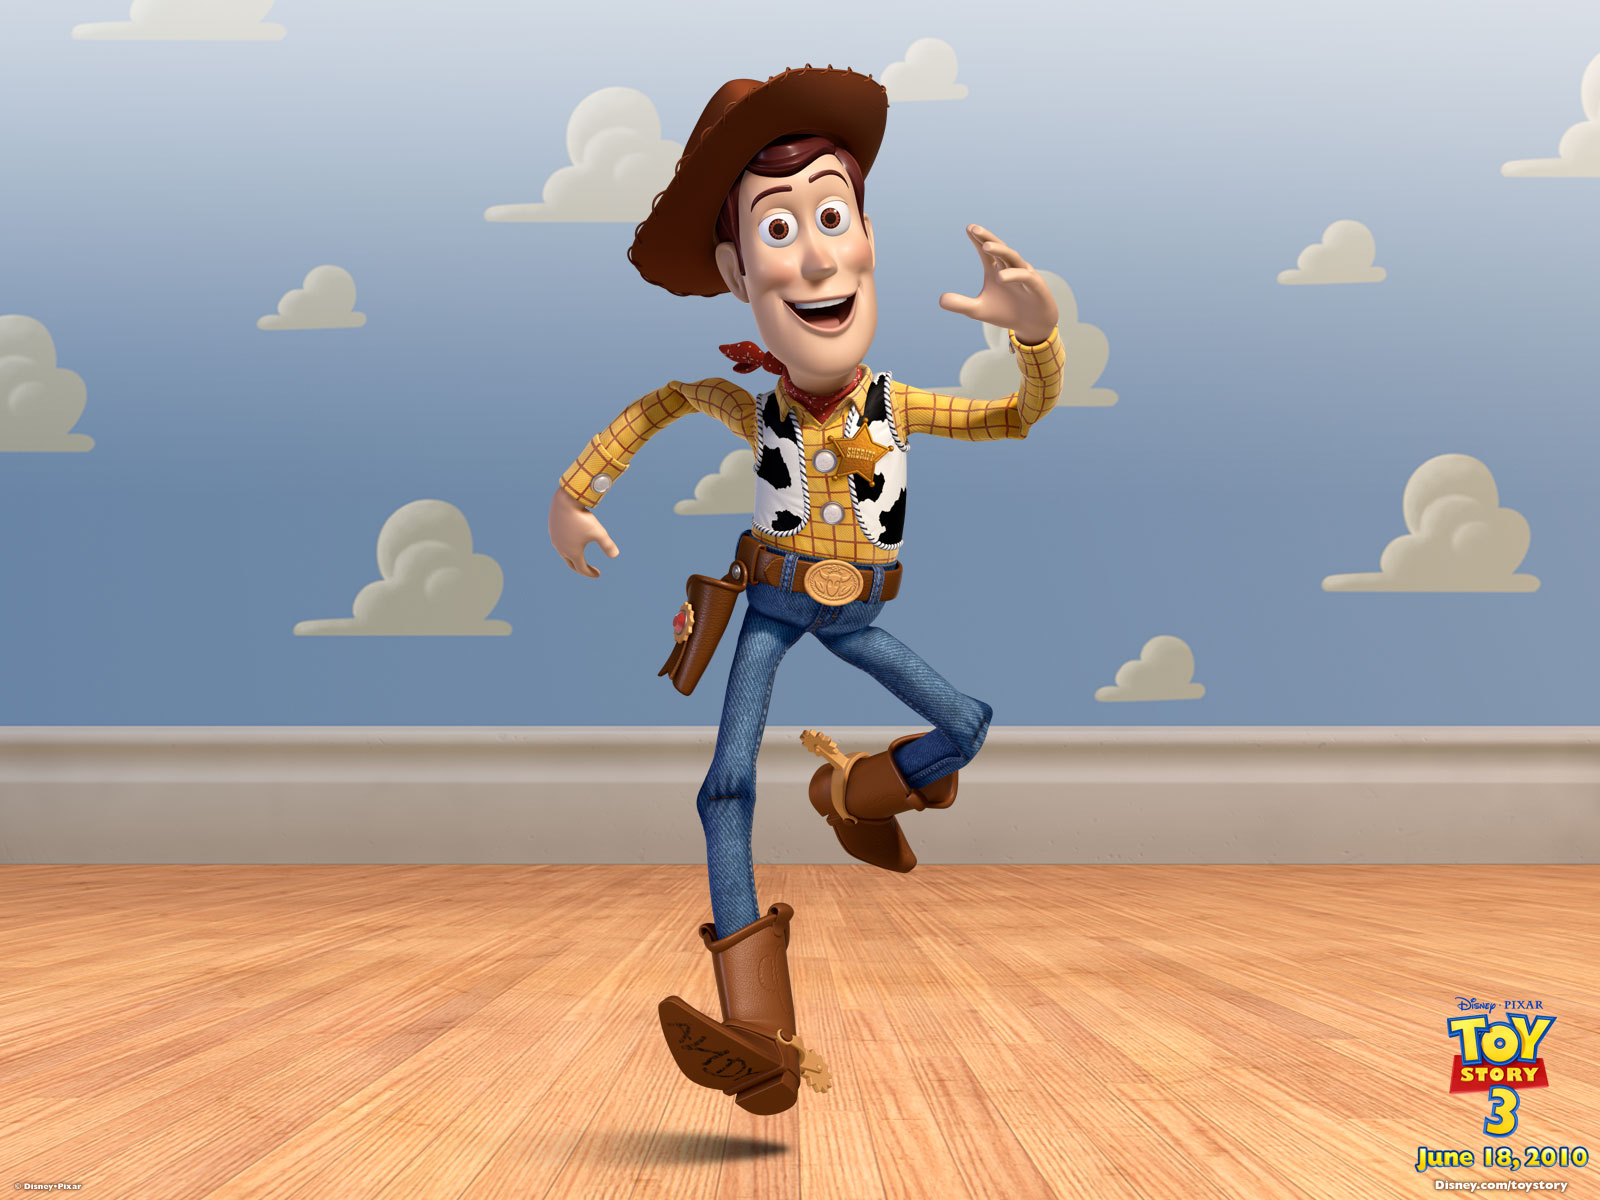  Toy Story wallpaper   Click picture for high resolution HD wallpaper 1600x1200